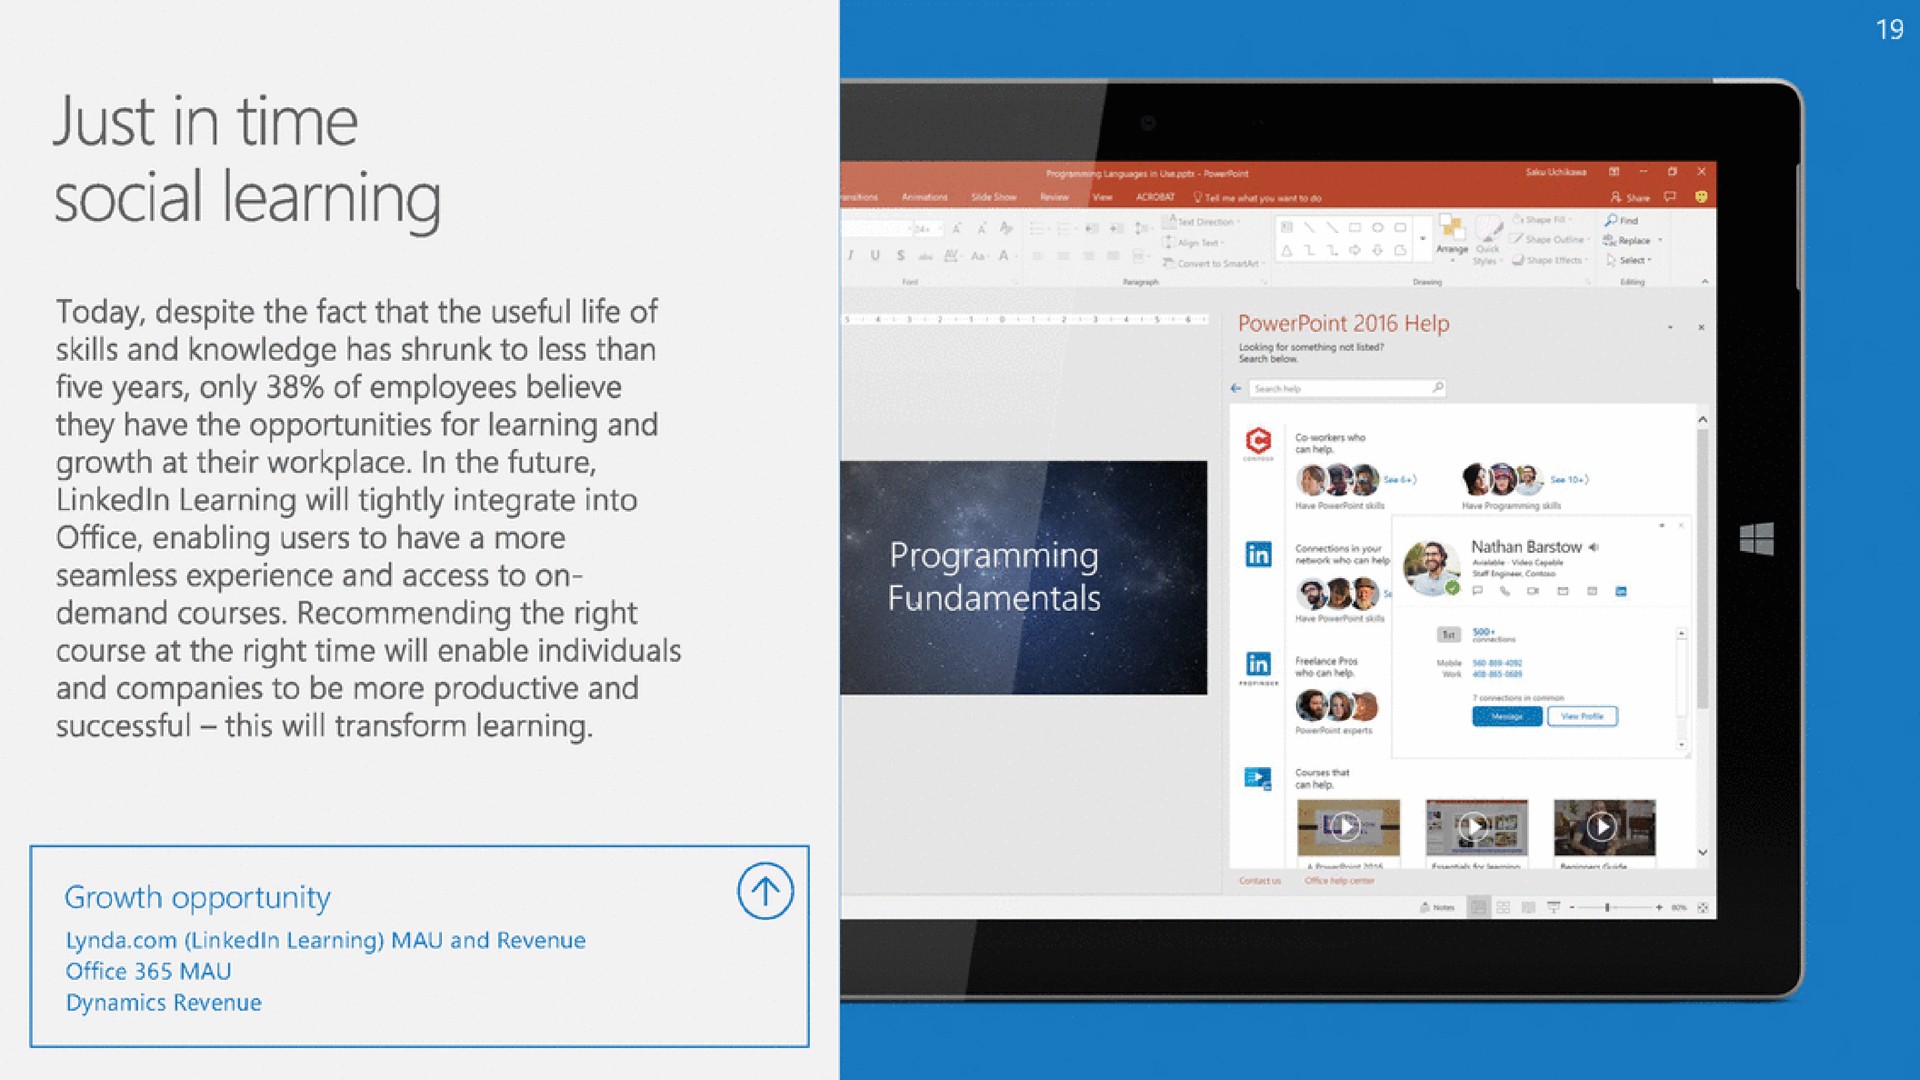 just in time social learning | Microsoft